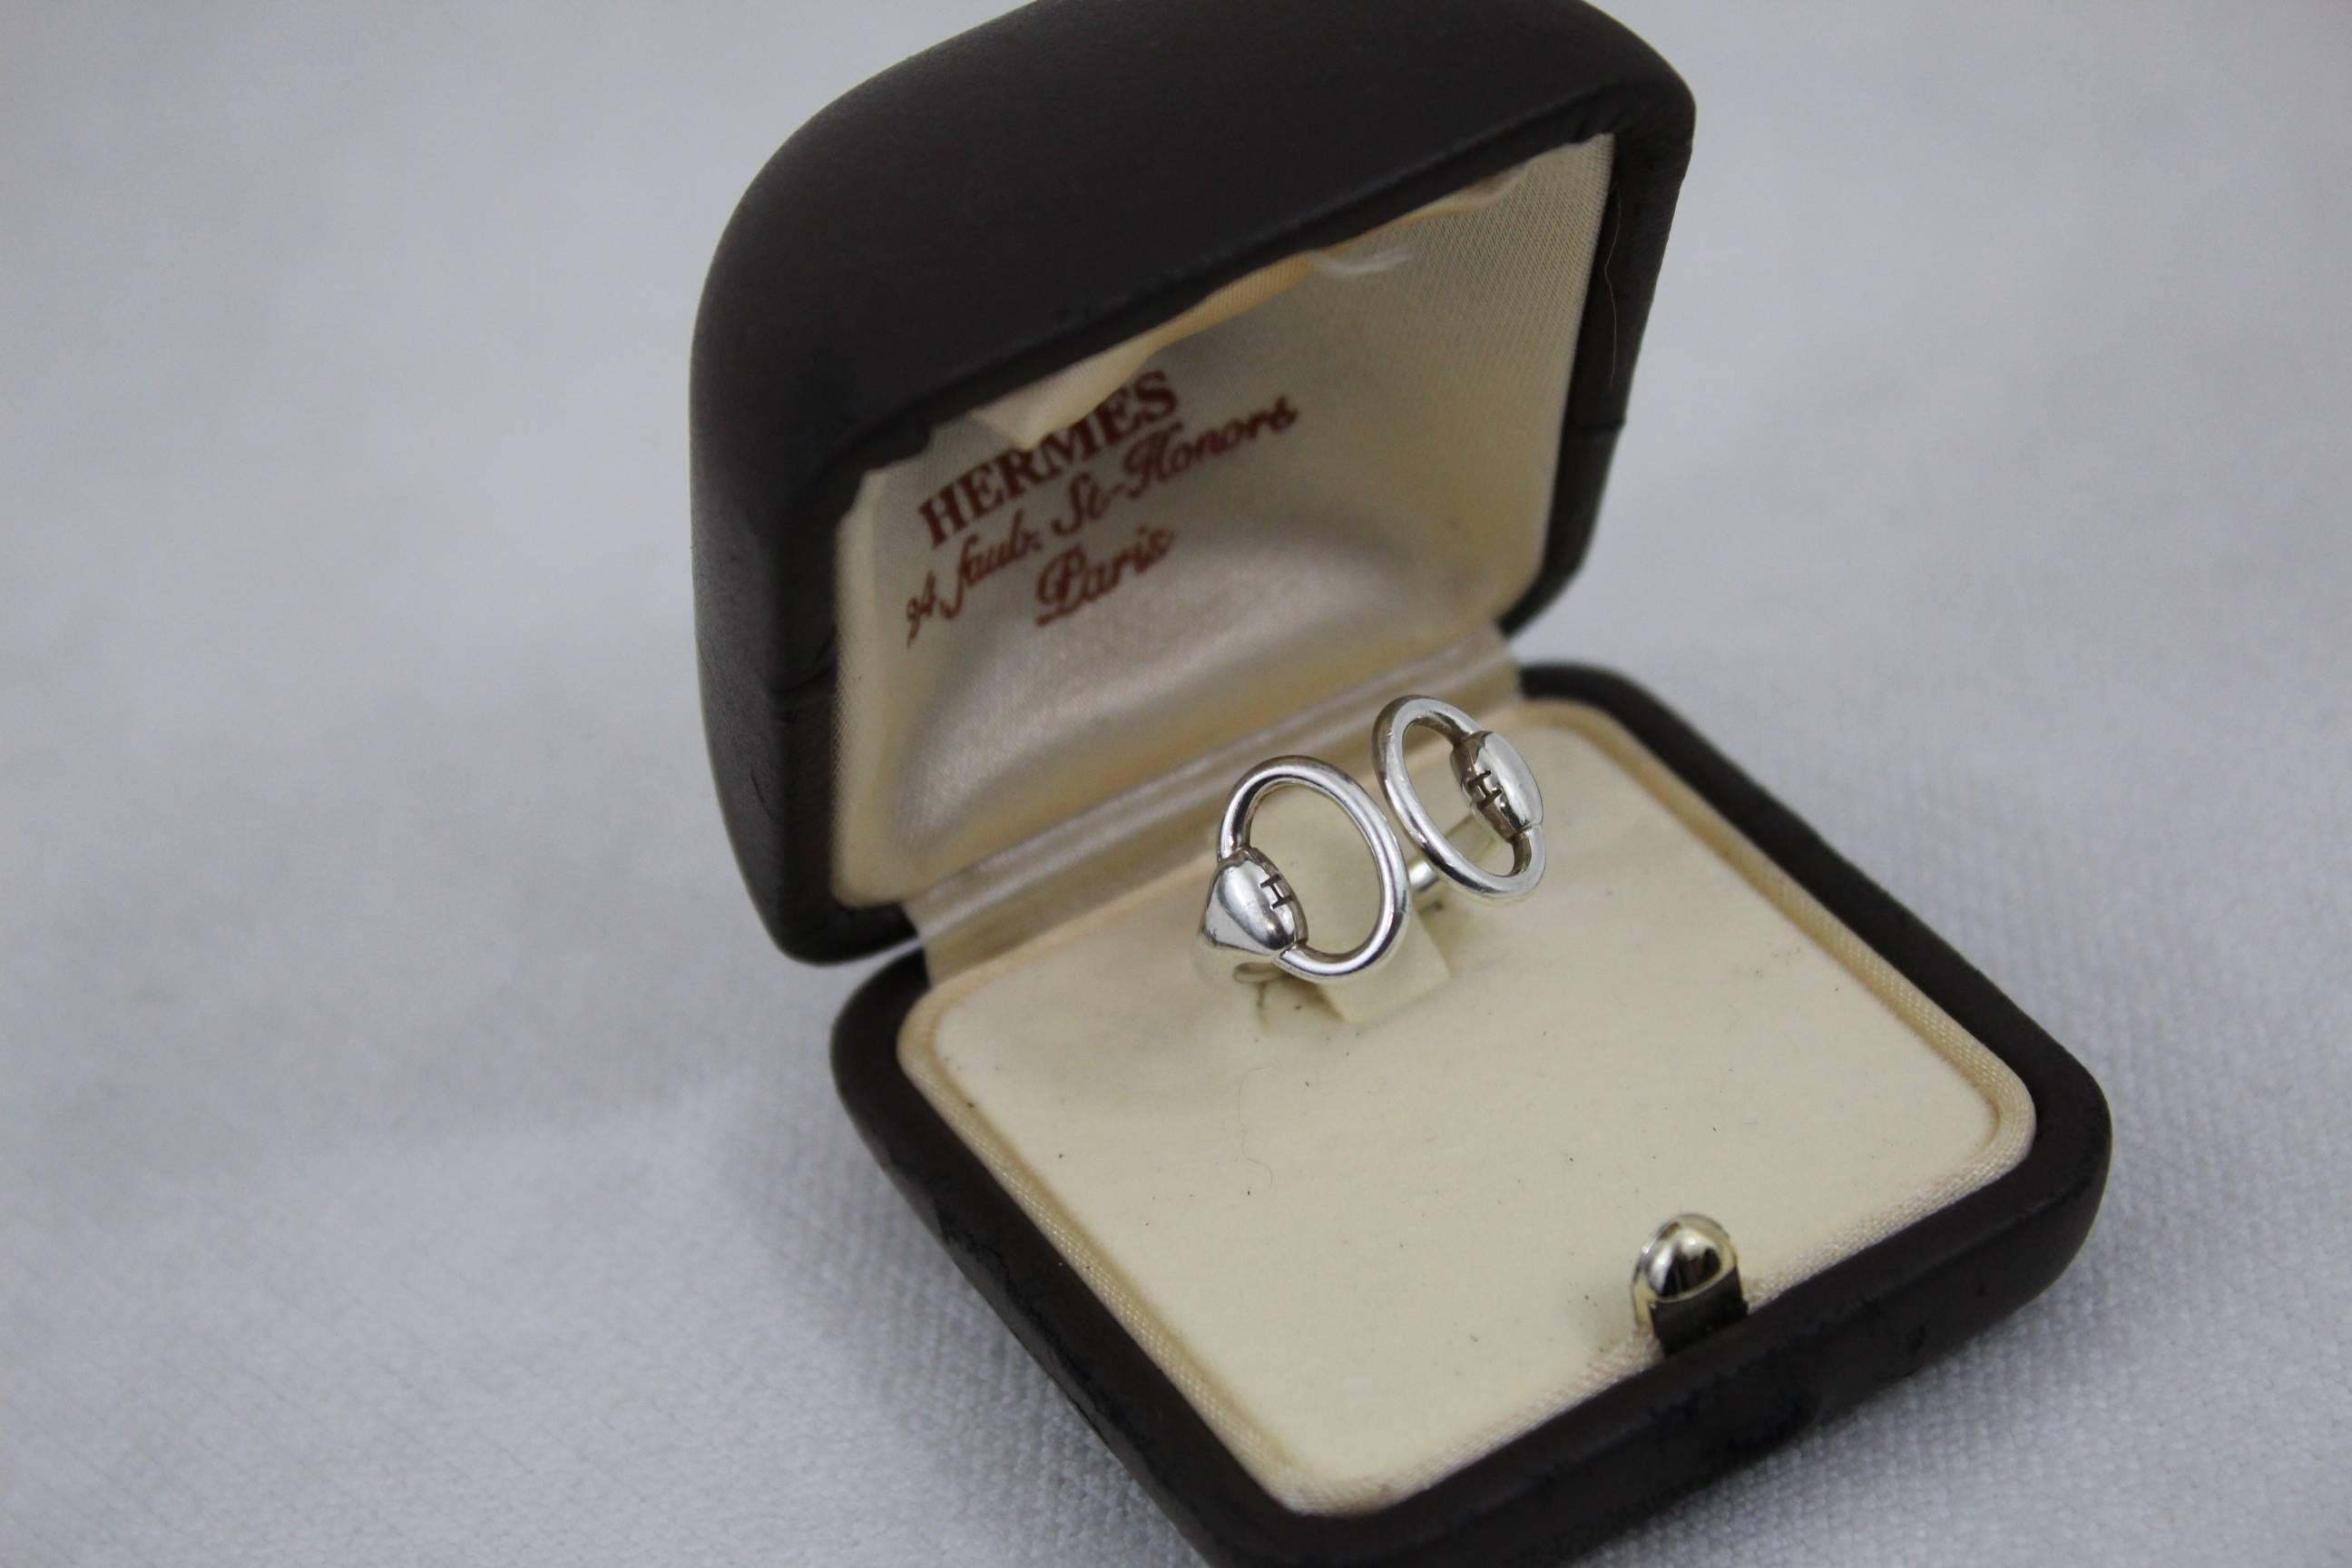 Awesome Vintage Hermes nausicaa Ring in sterling silver.

With box

Godd condition. 

Size european 53